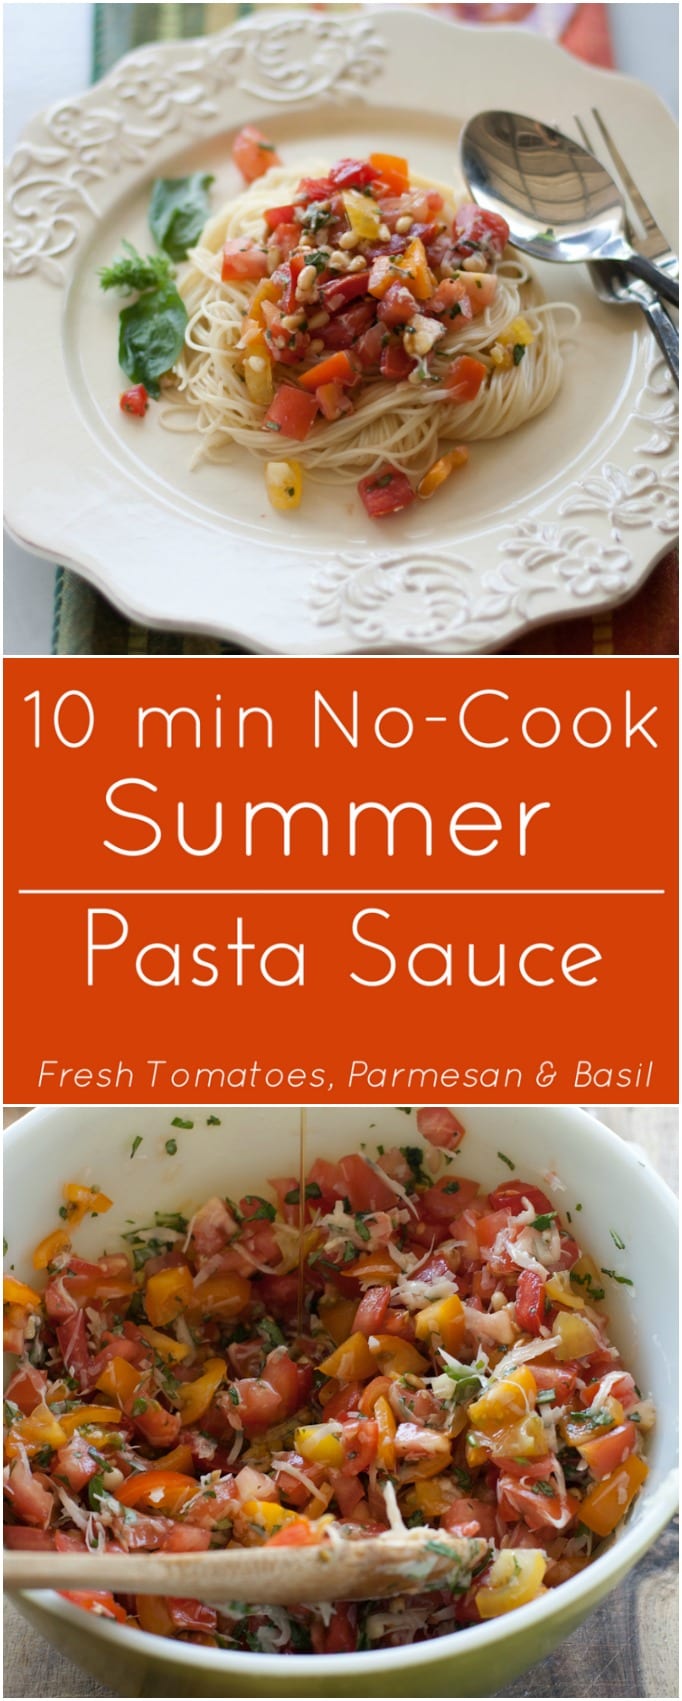 No-cook tomato summer pasta sauce image for Pinterest.